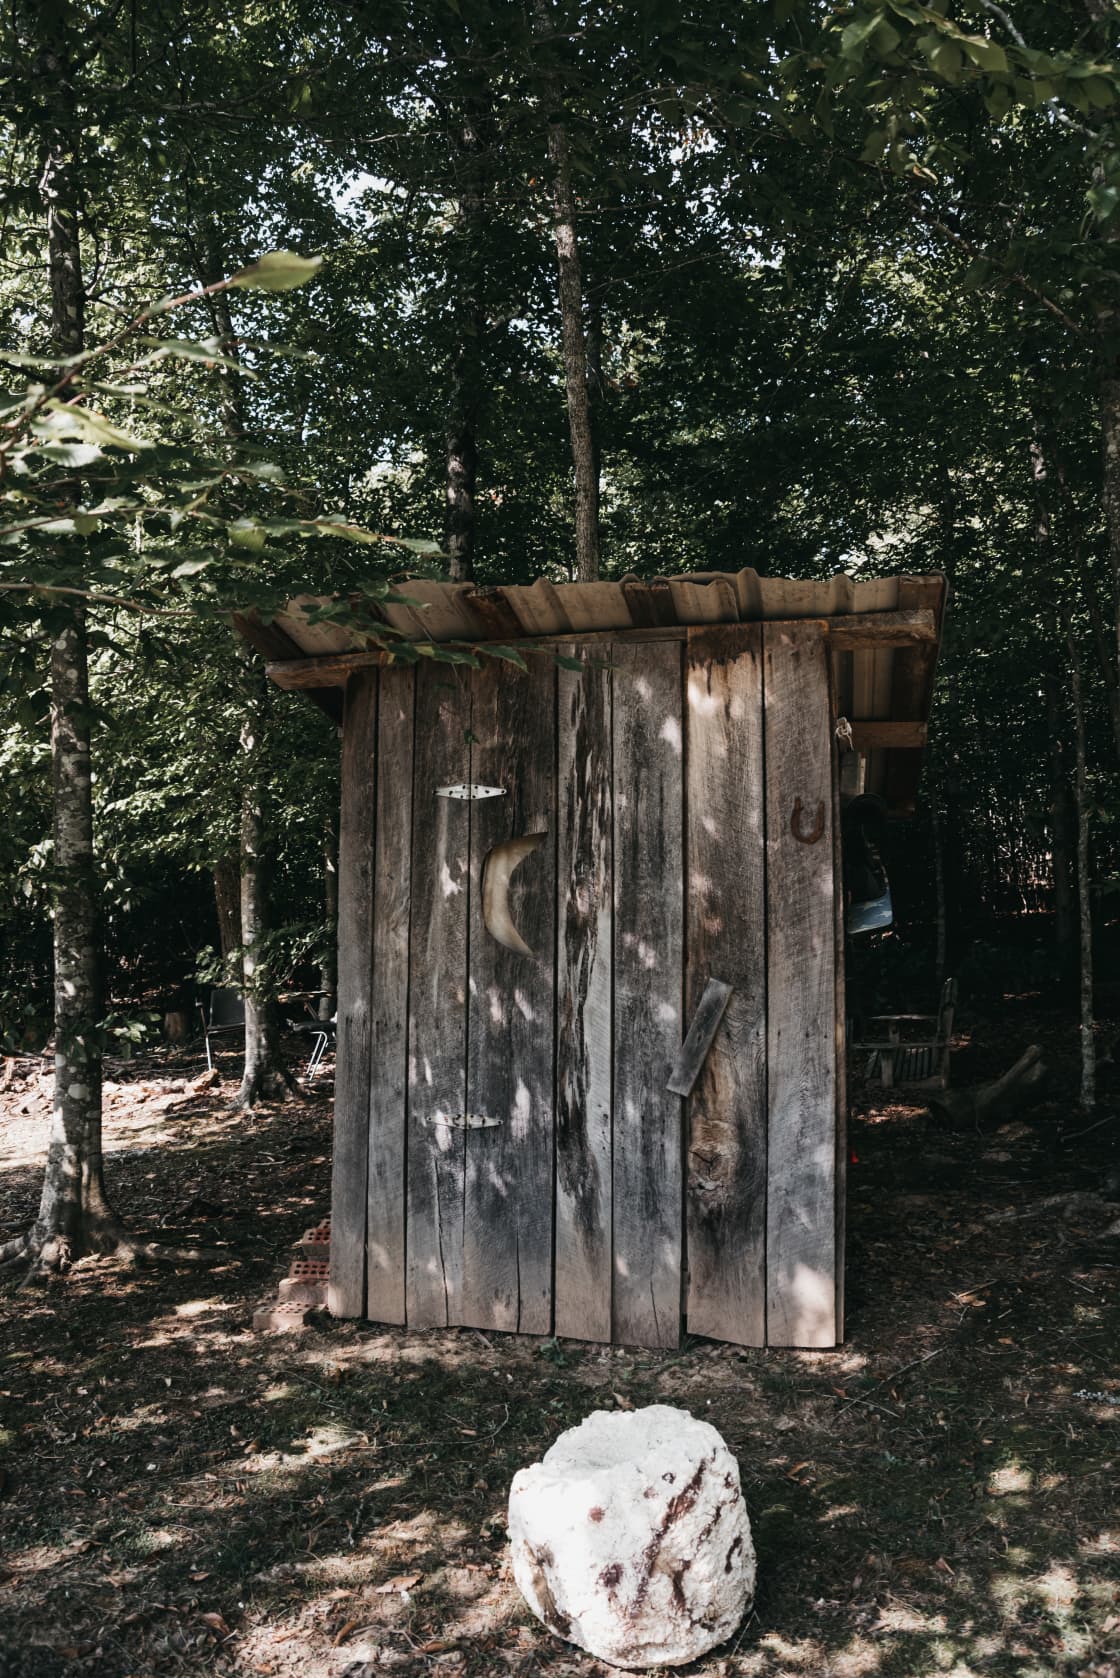 Outhouse near the tent sites for doing outhouse things..